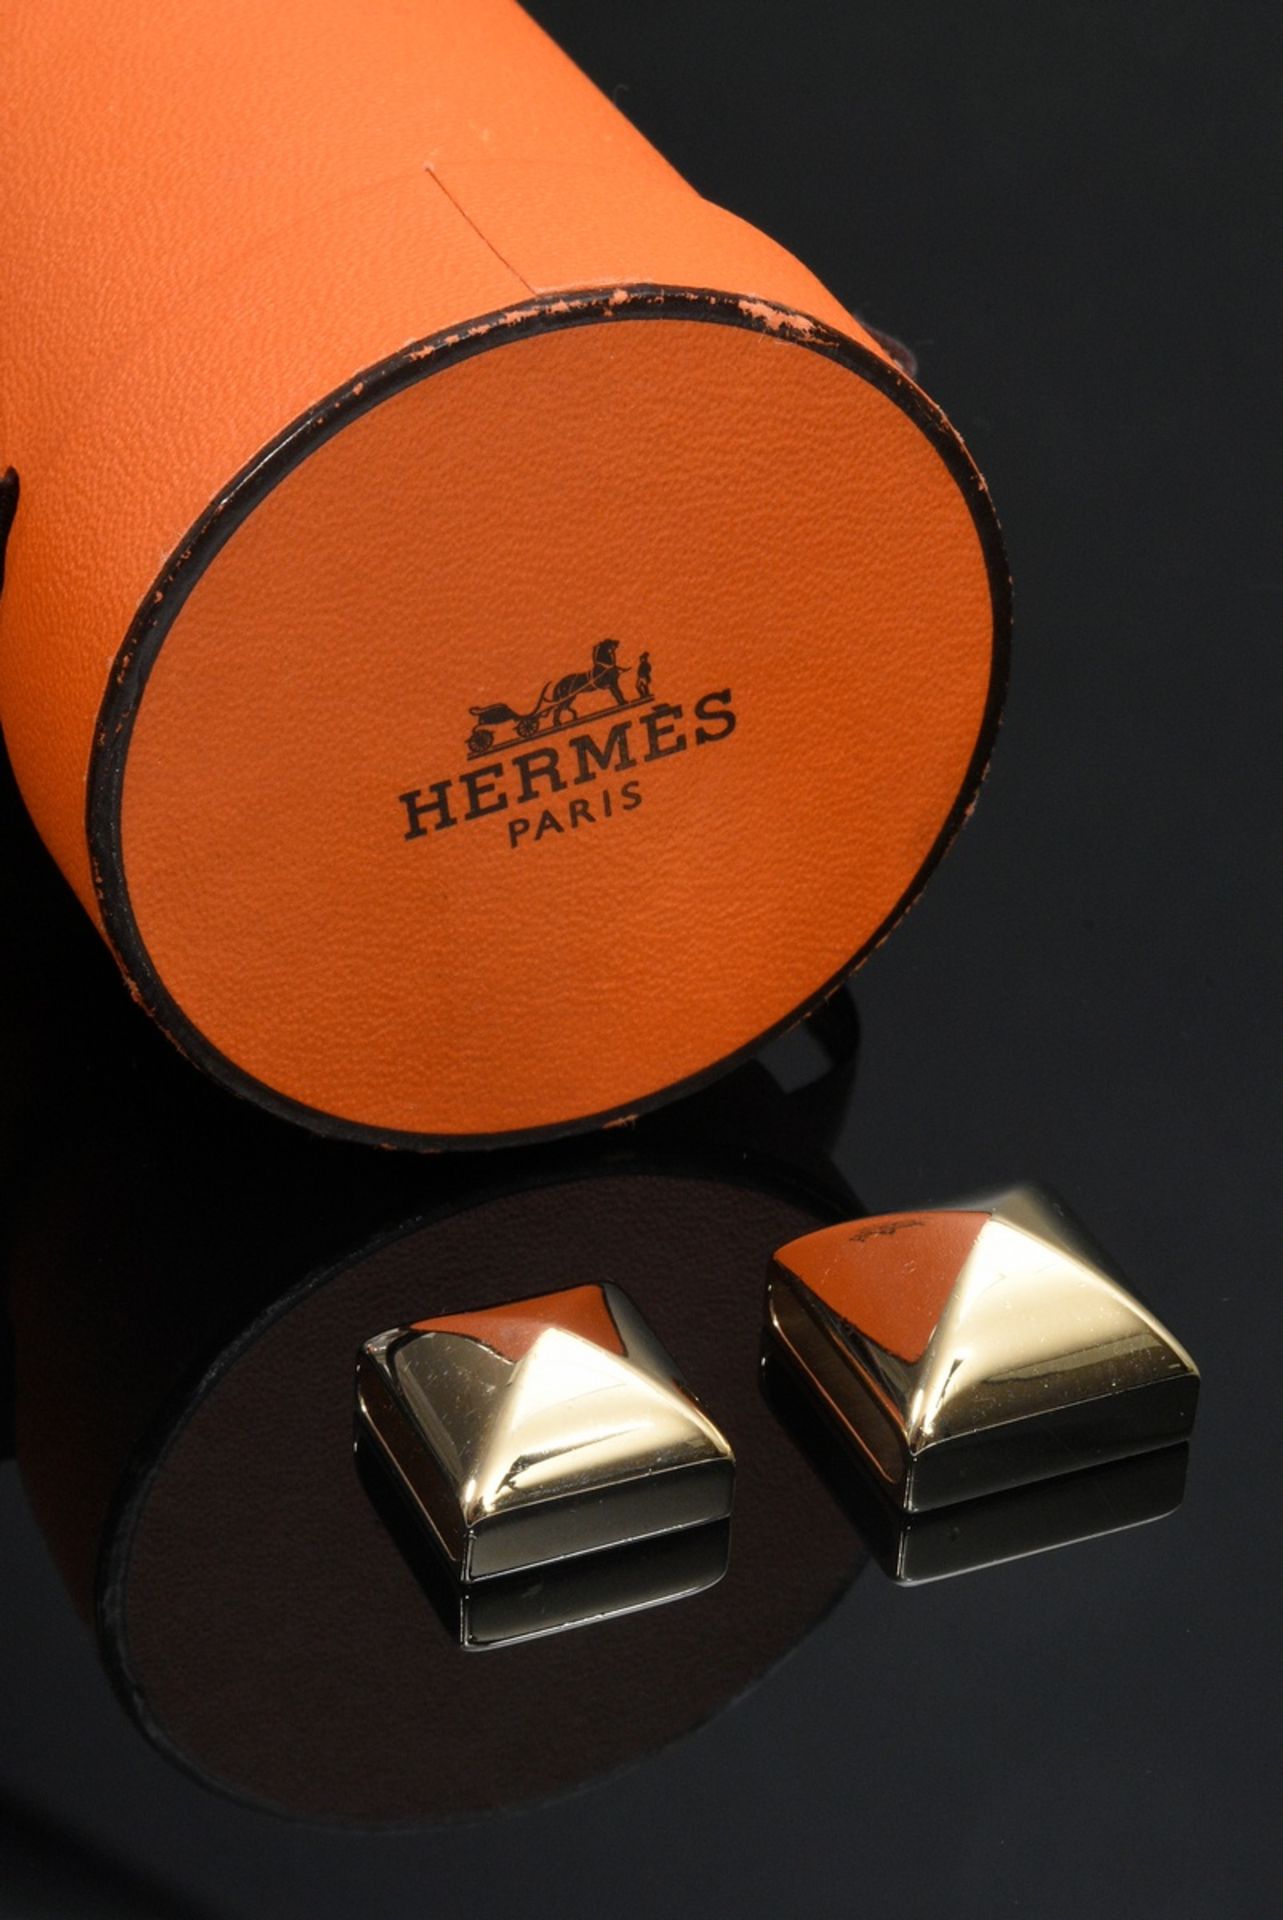 2 Hermès Twilly cloth rings "Pyramid Medor", metal gold plated, 1,8x1,8cm, in original bag and box, - Image 3 of 6